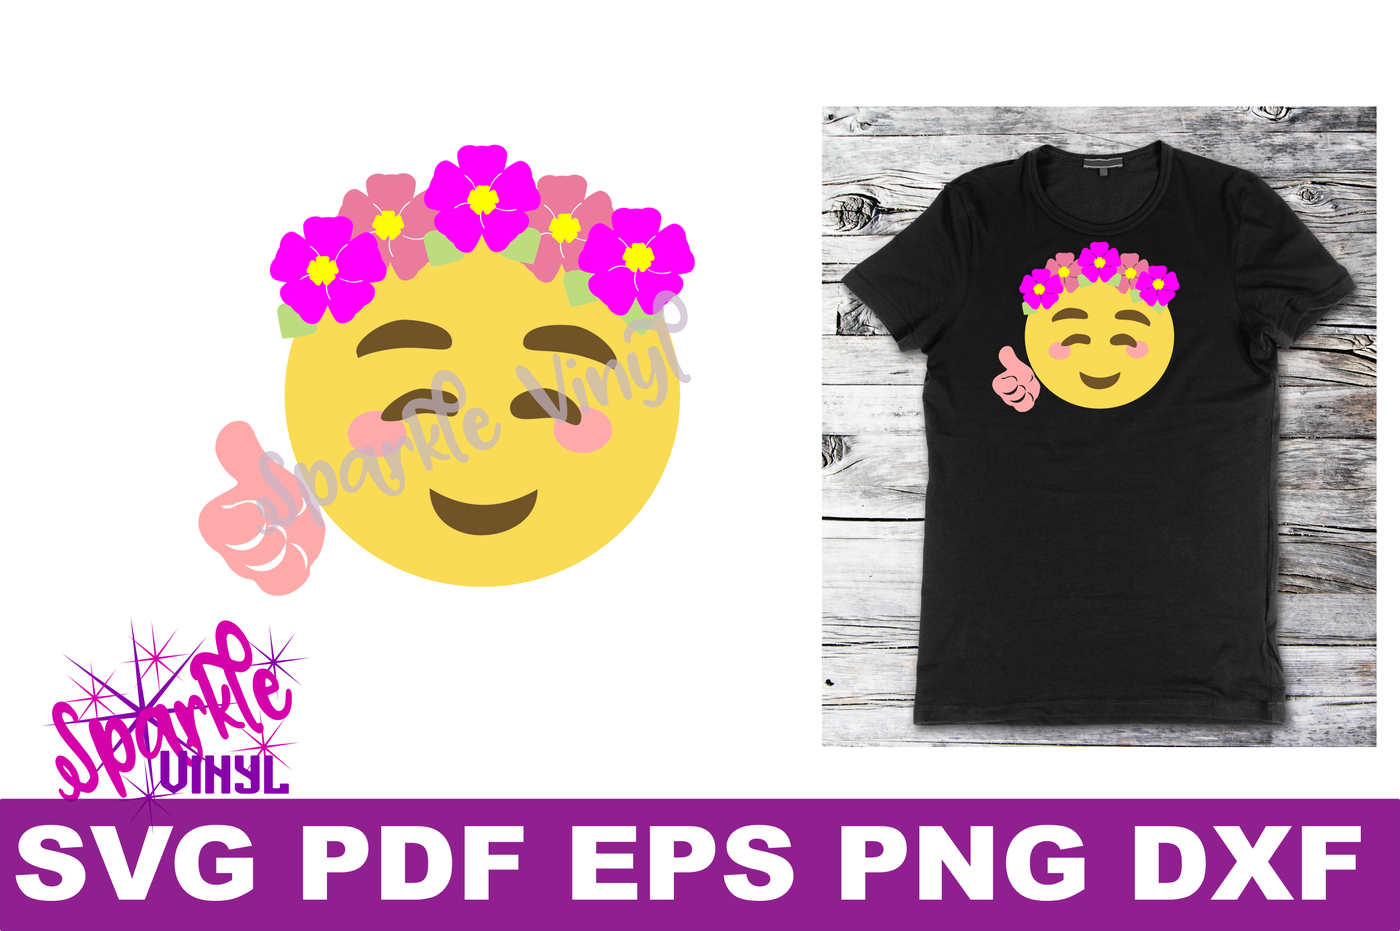 Download Svg Emoji Smile Flowers Thumbs Up Shirt Sign Printable Cut File Svg Dxf Eps Png For Cricut Or Silhouette By Sparkle Vinyl Designs Thehungryjpeg Com